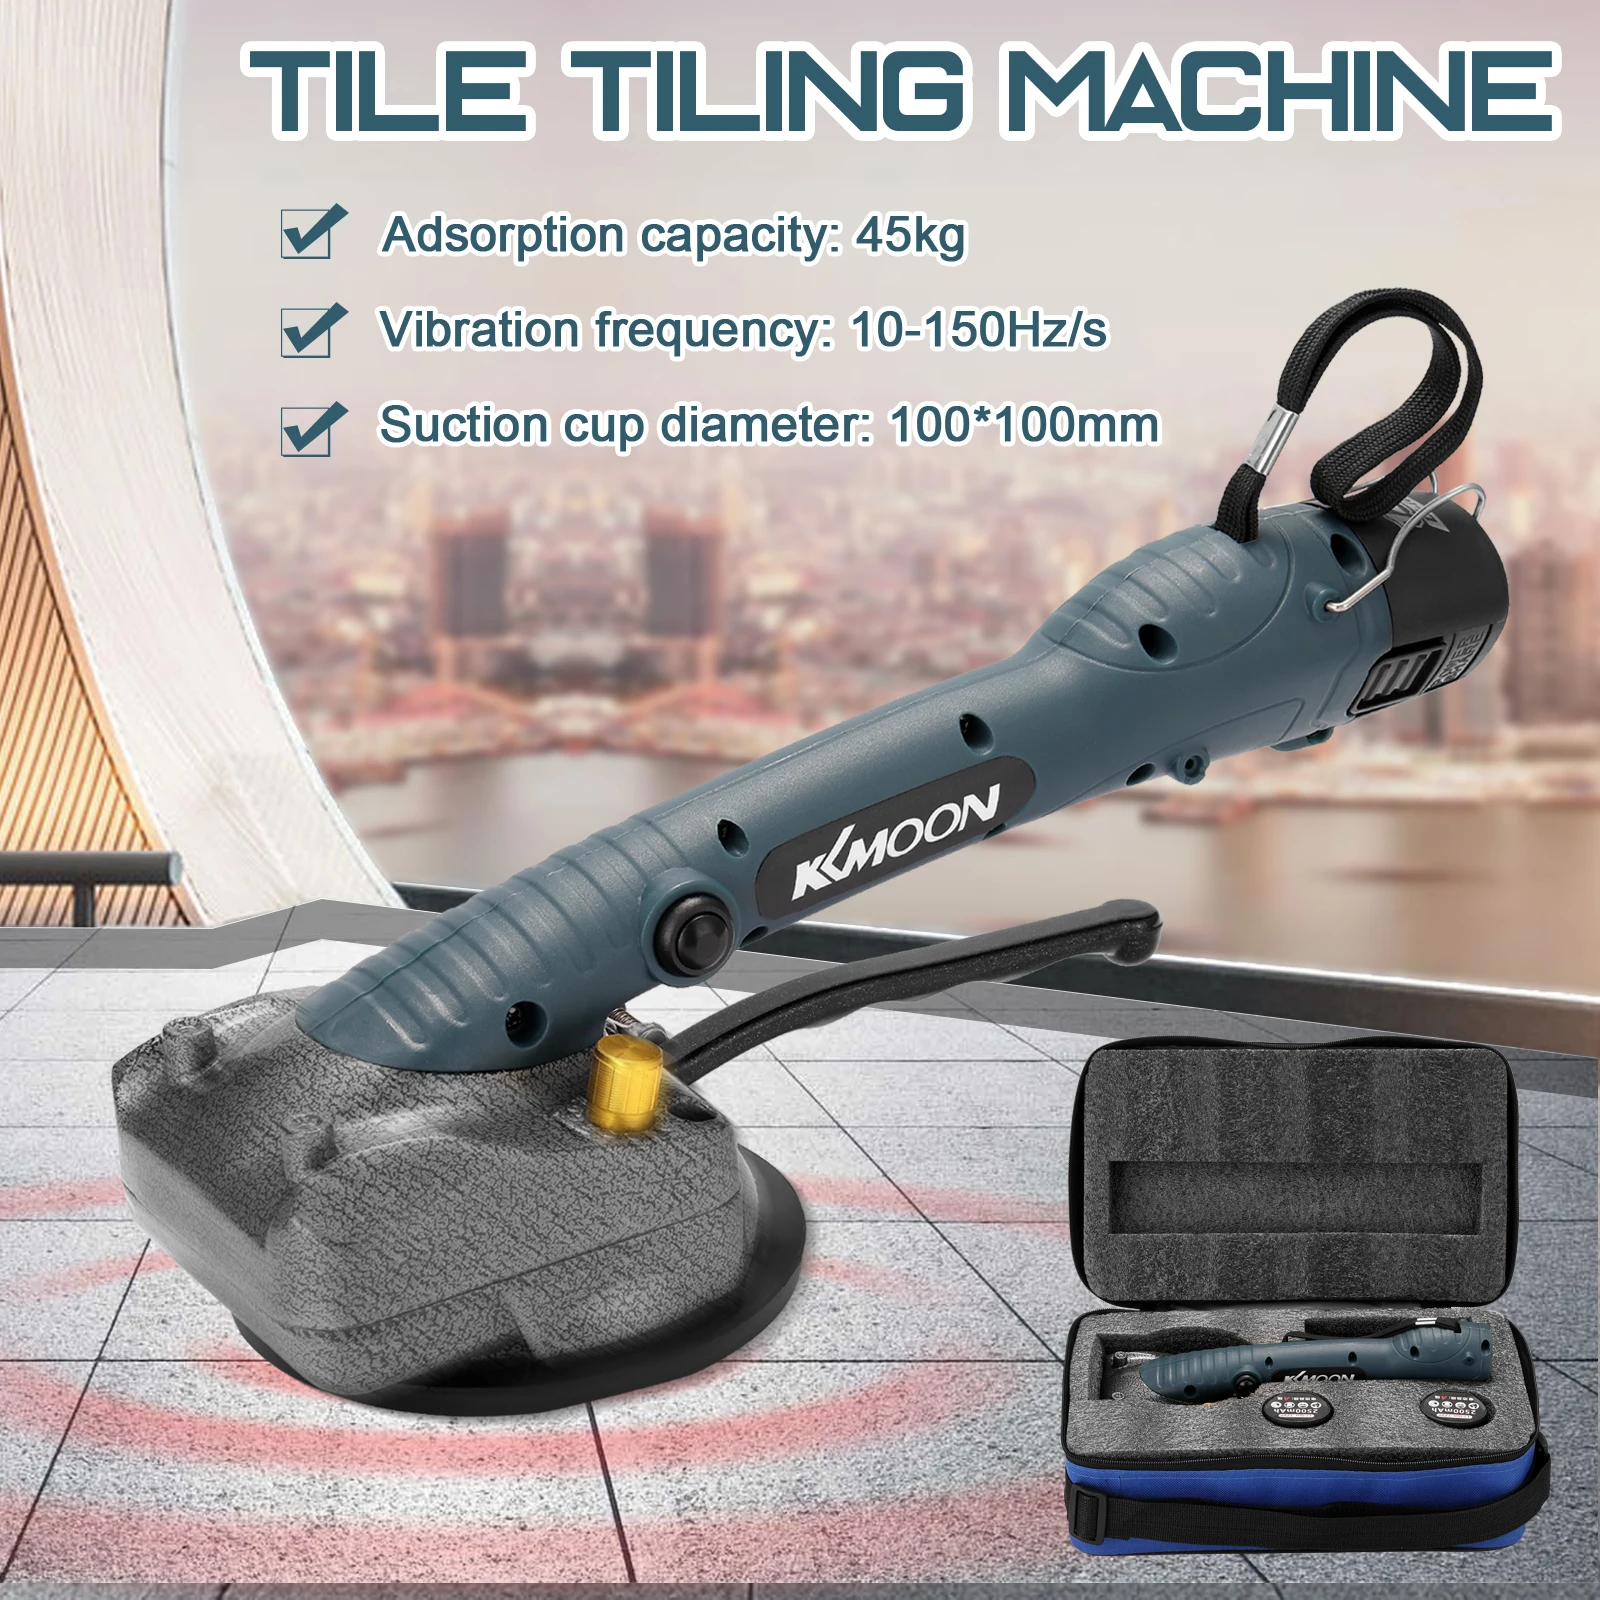 

KKmoon 10-150Hz Tile Tiling Machine Wall Floor Tiles Laying Vibrating Tool with 100*100mm Suction Cup